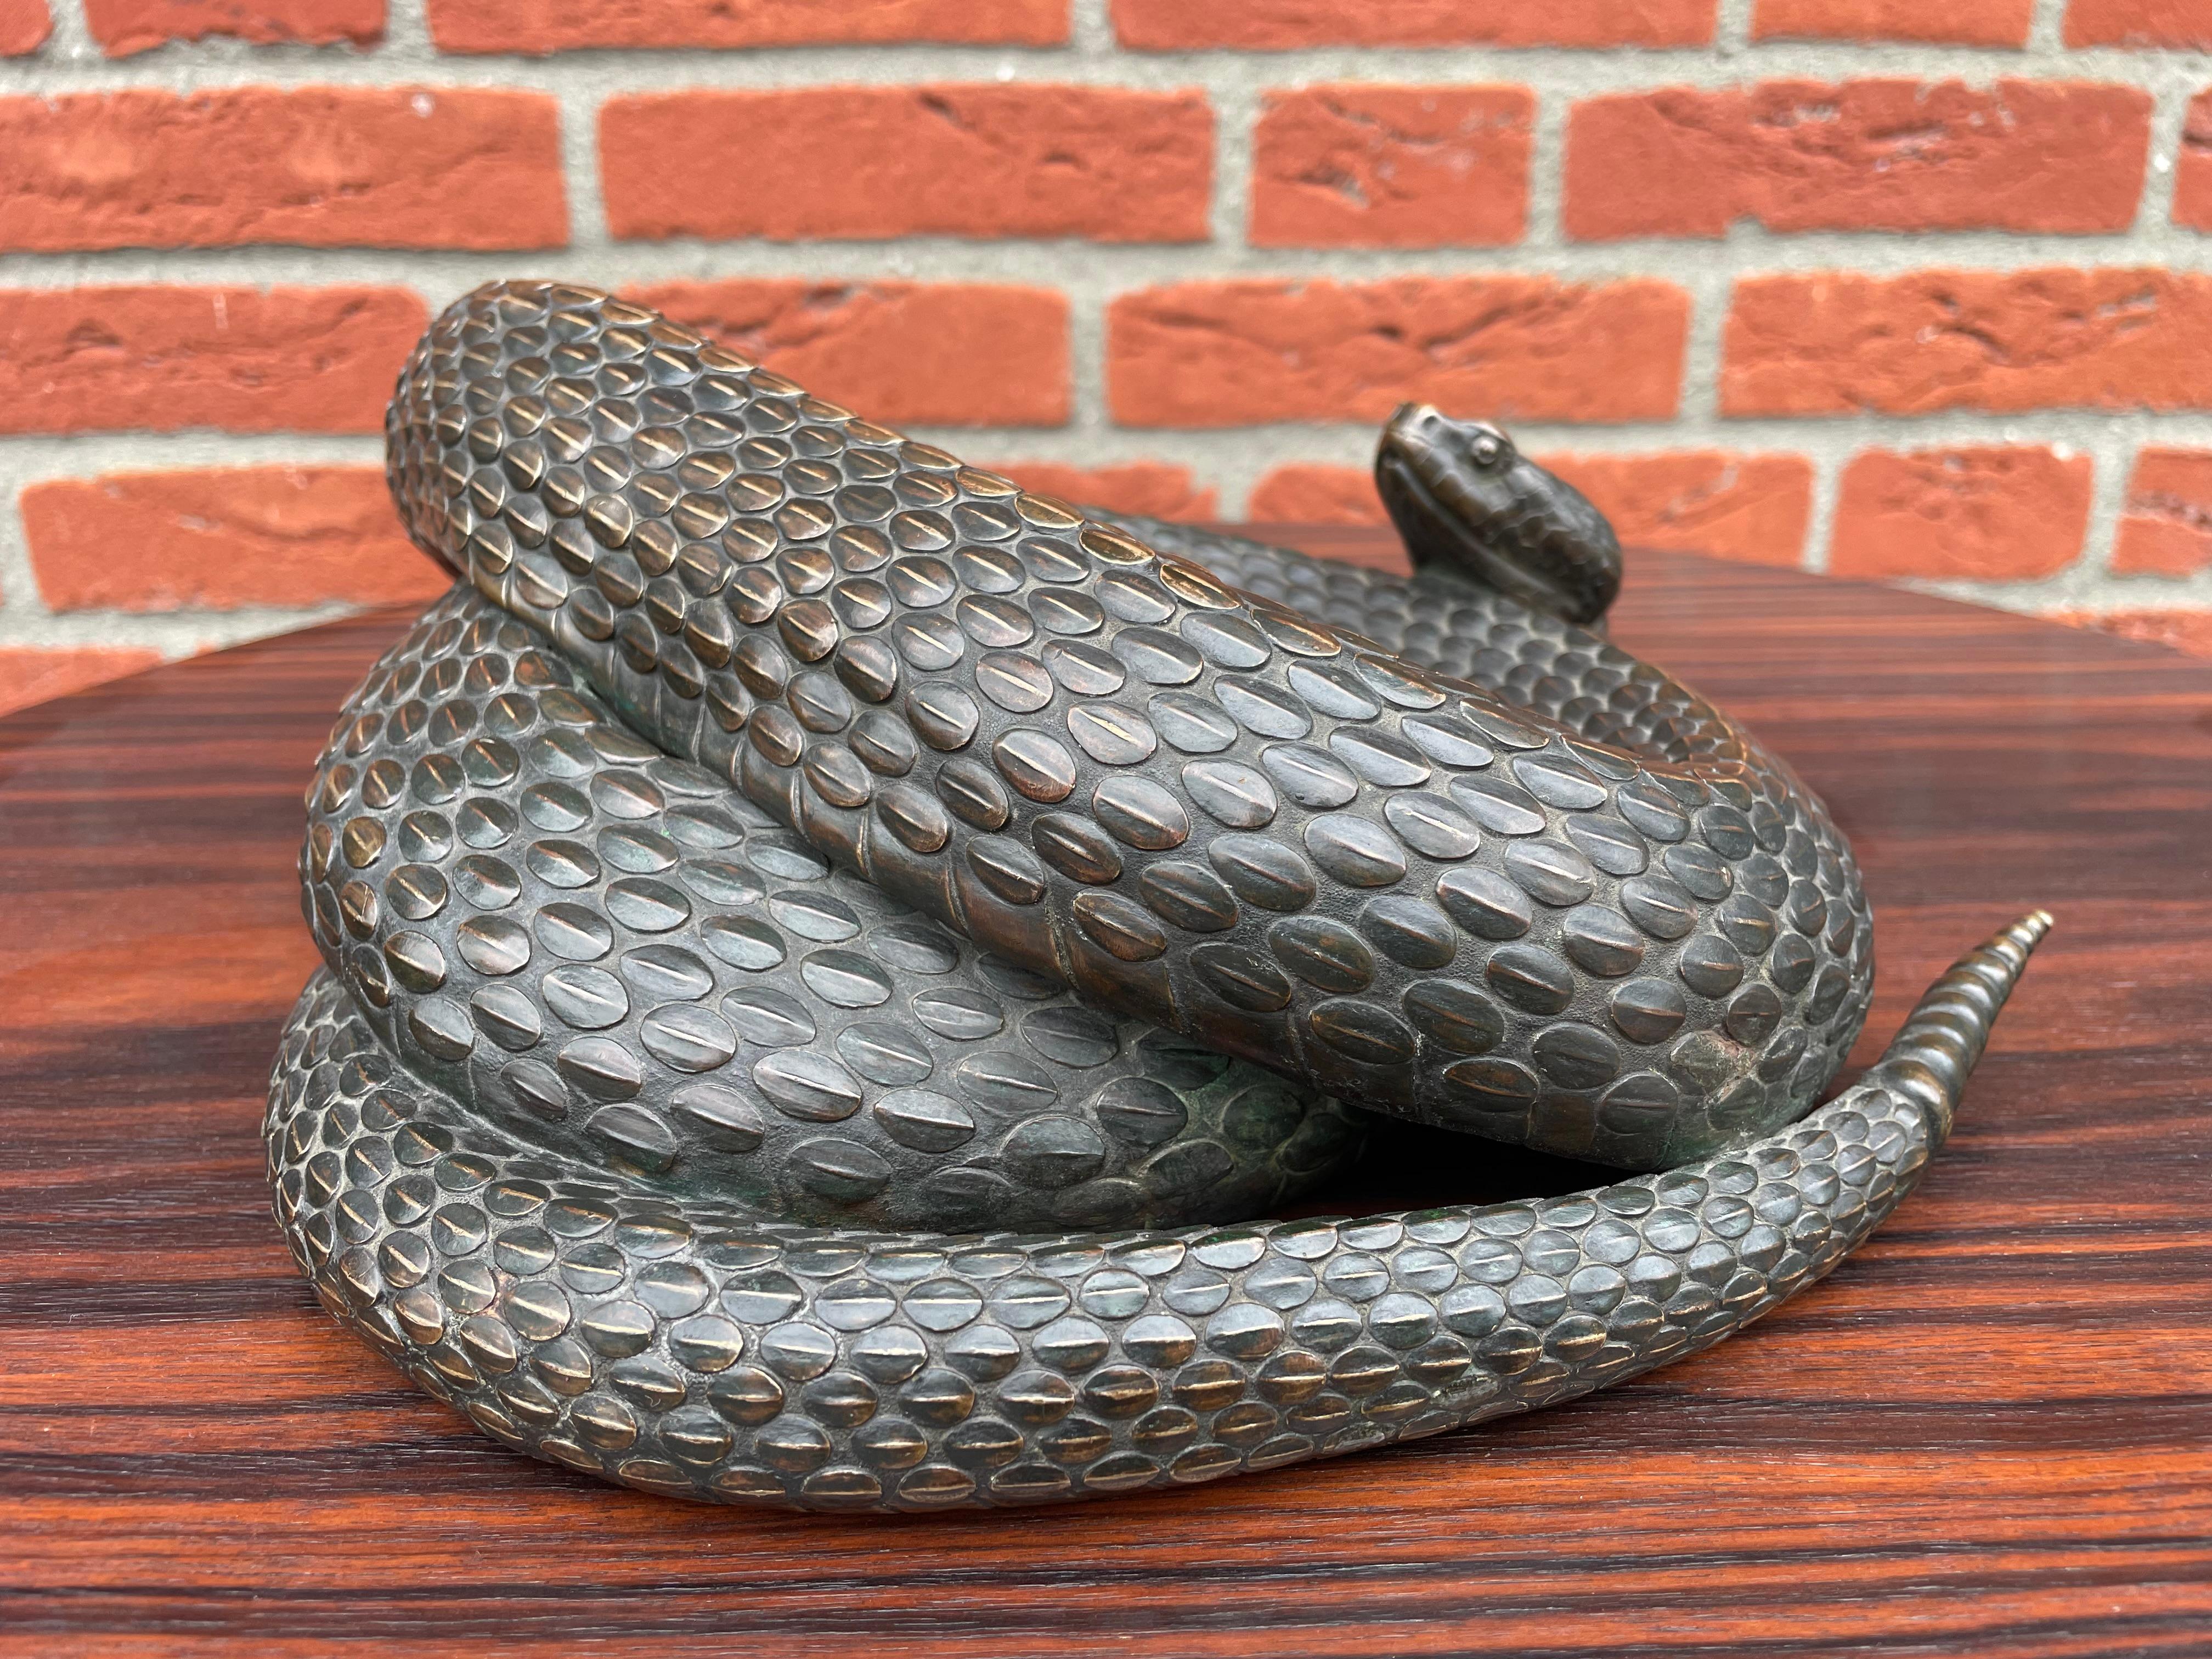 Museum Worthy Antique Bronze Coiled Rattlesnake Sculpture Signed & Marked 1885  For Sale 10